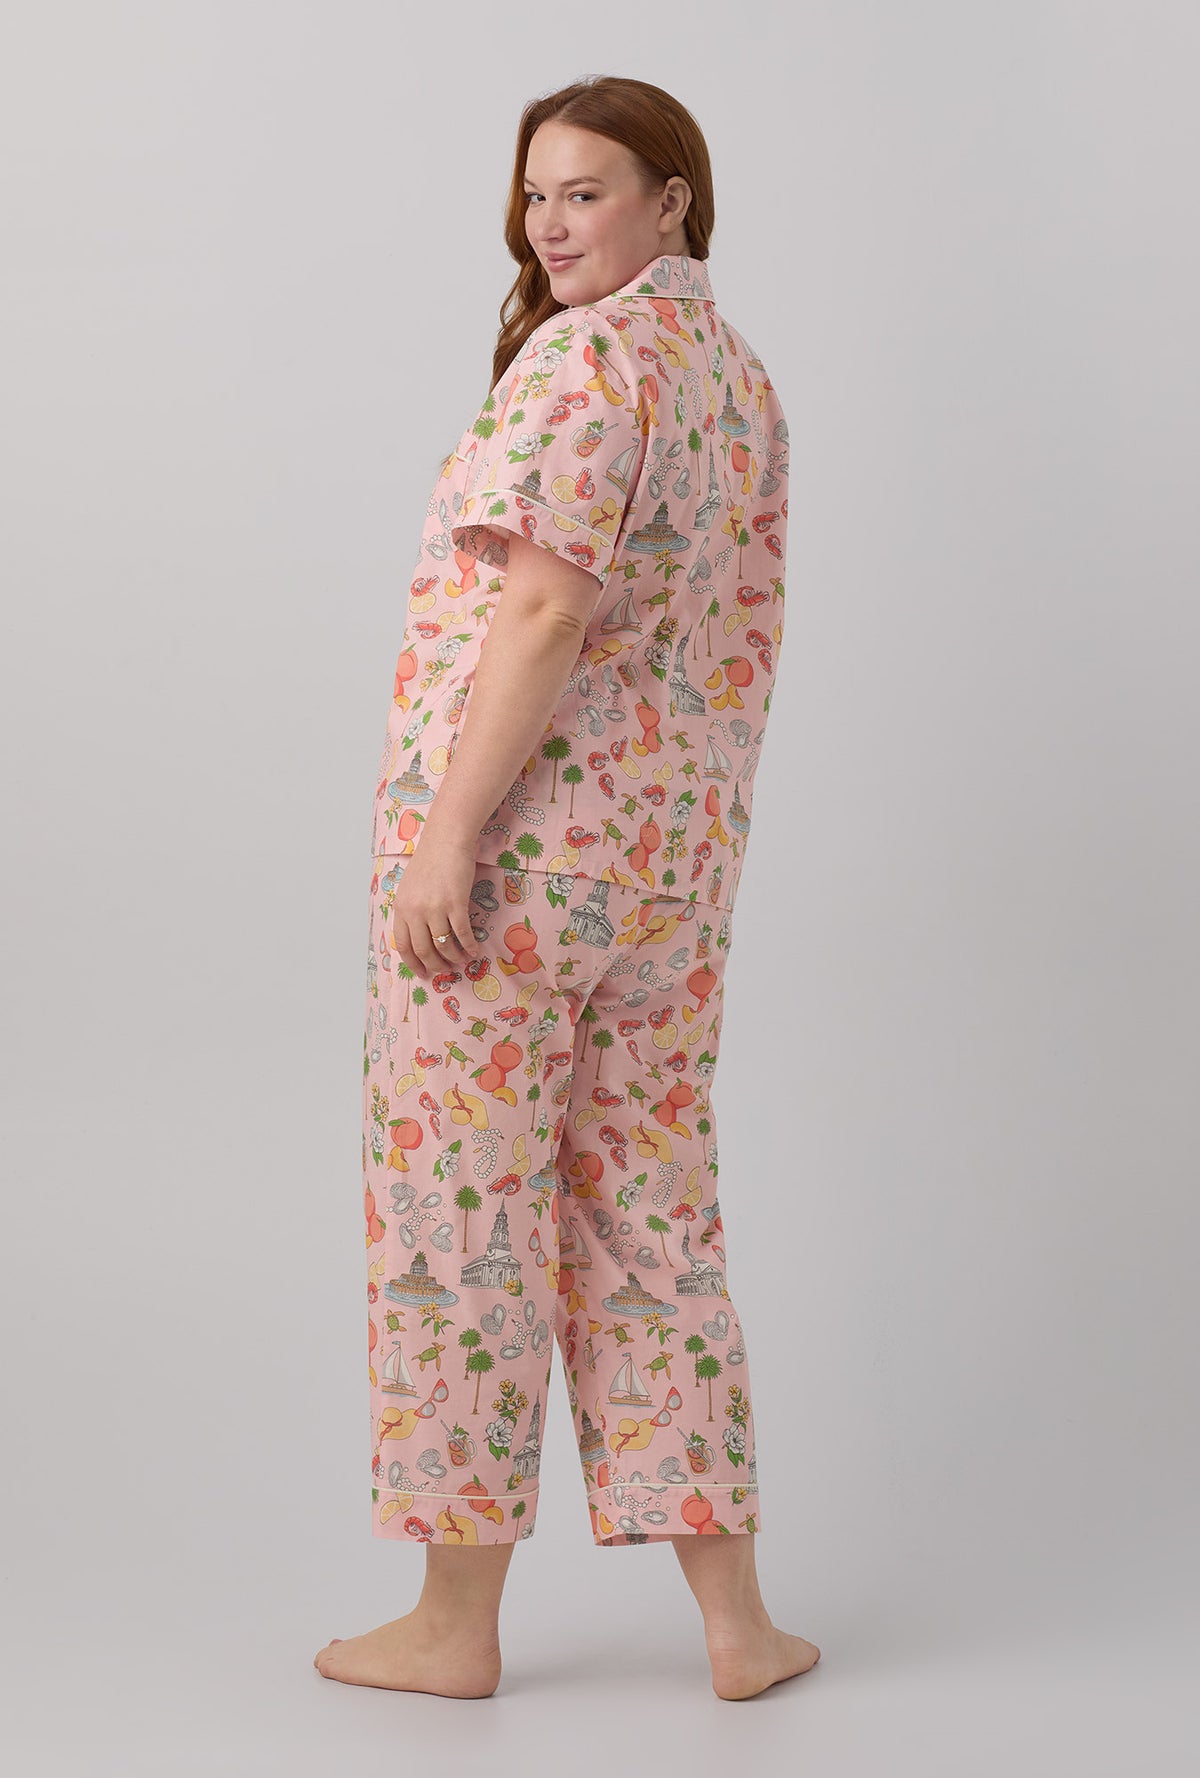 A lady wearing Short Sleeve Classic Shorty Stretch Jersey plus size PJ Set with Let&#39;s Do Brunch print